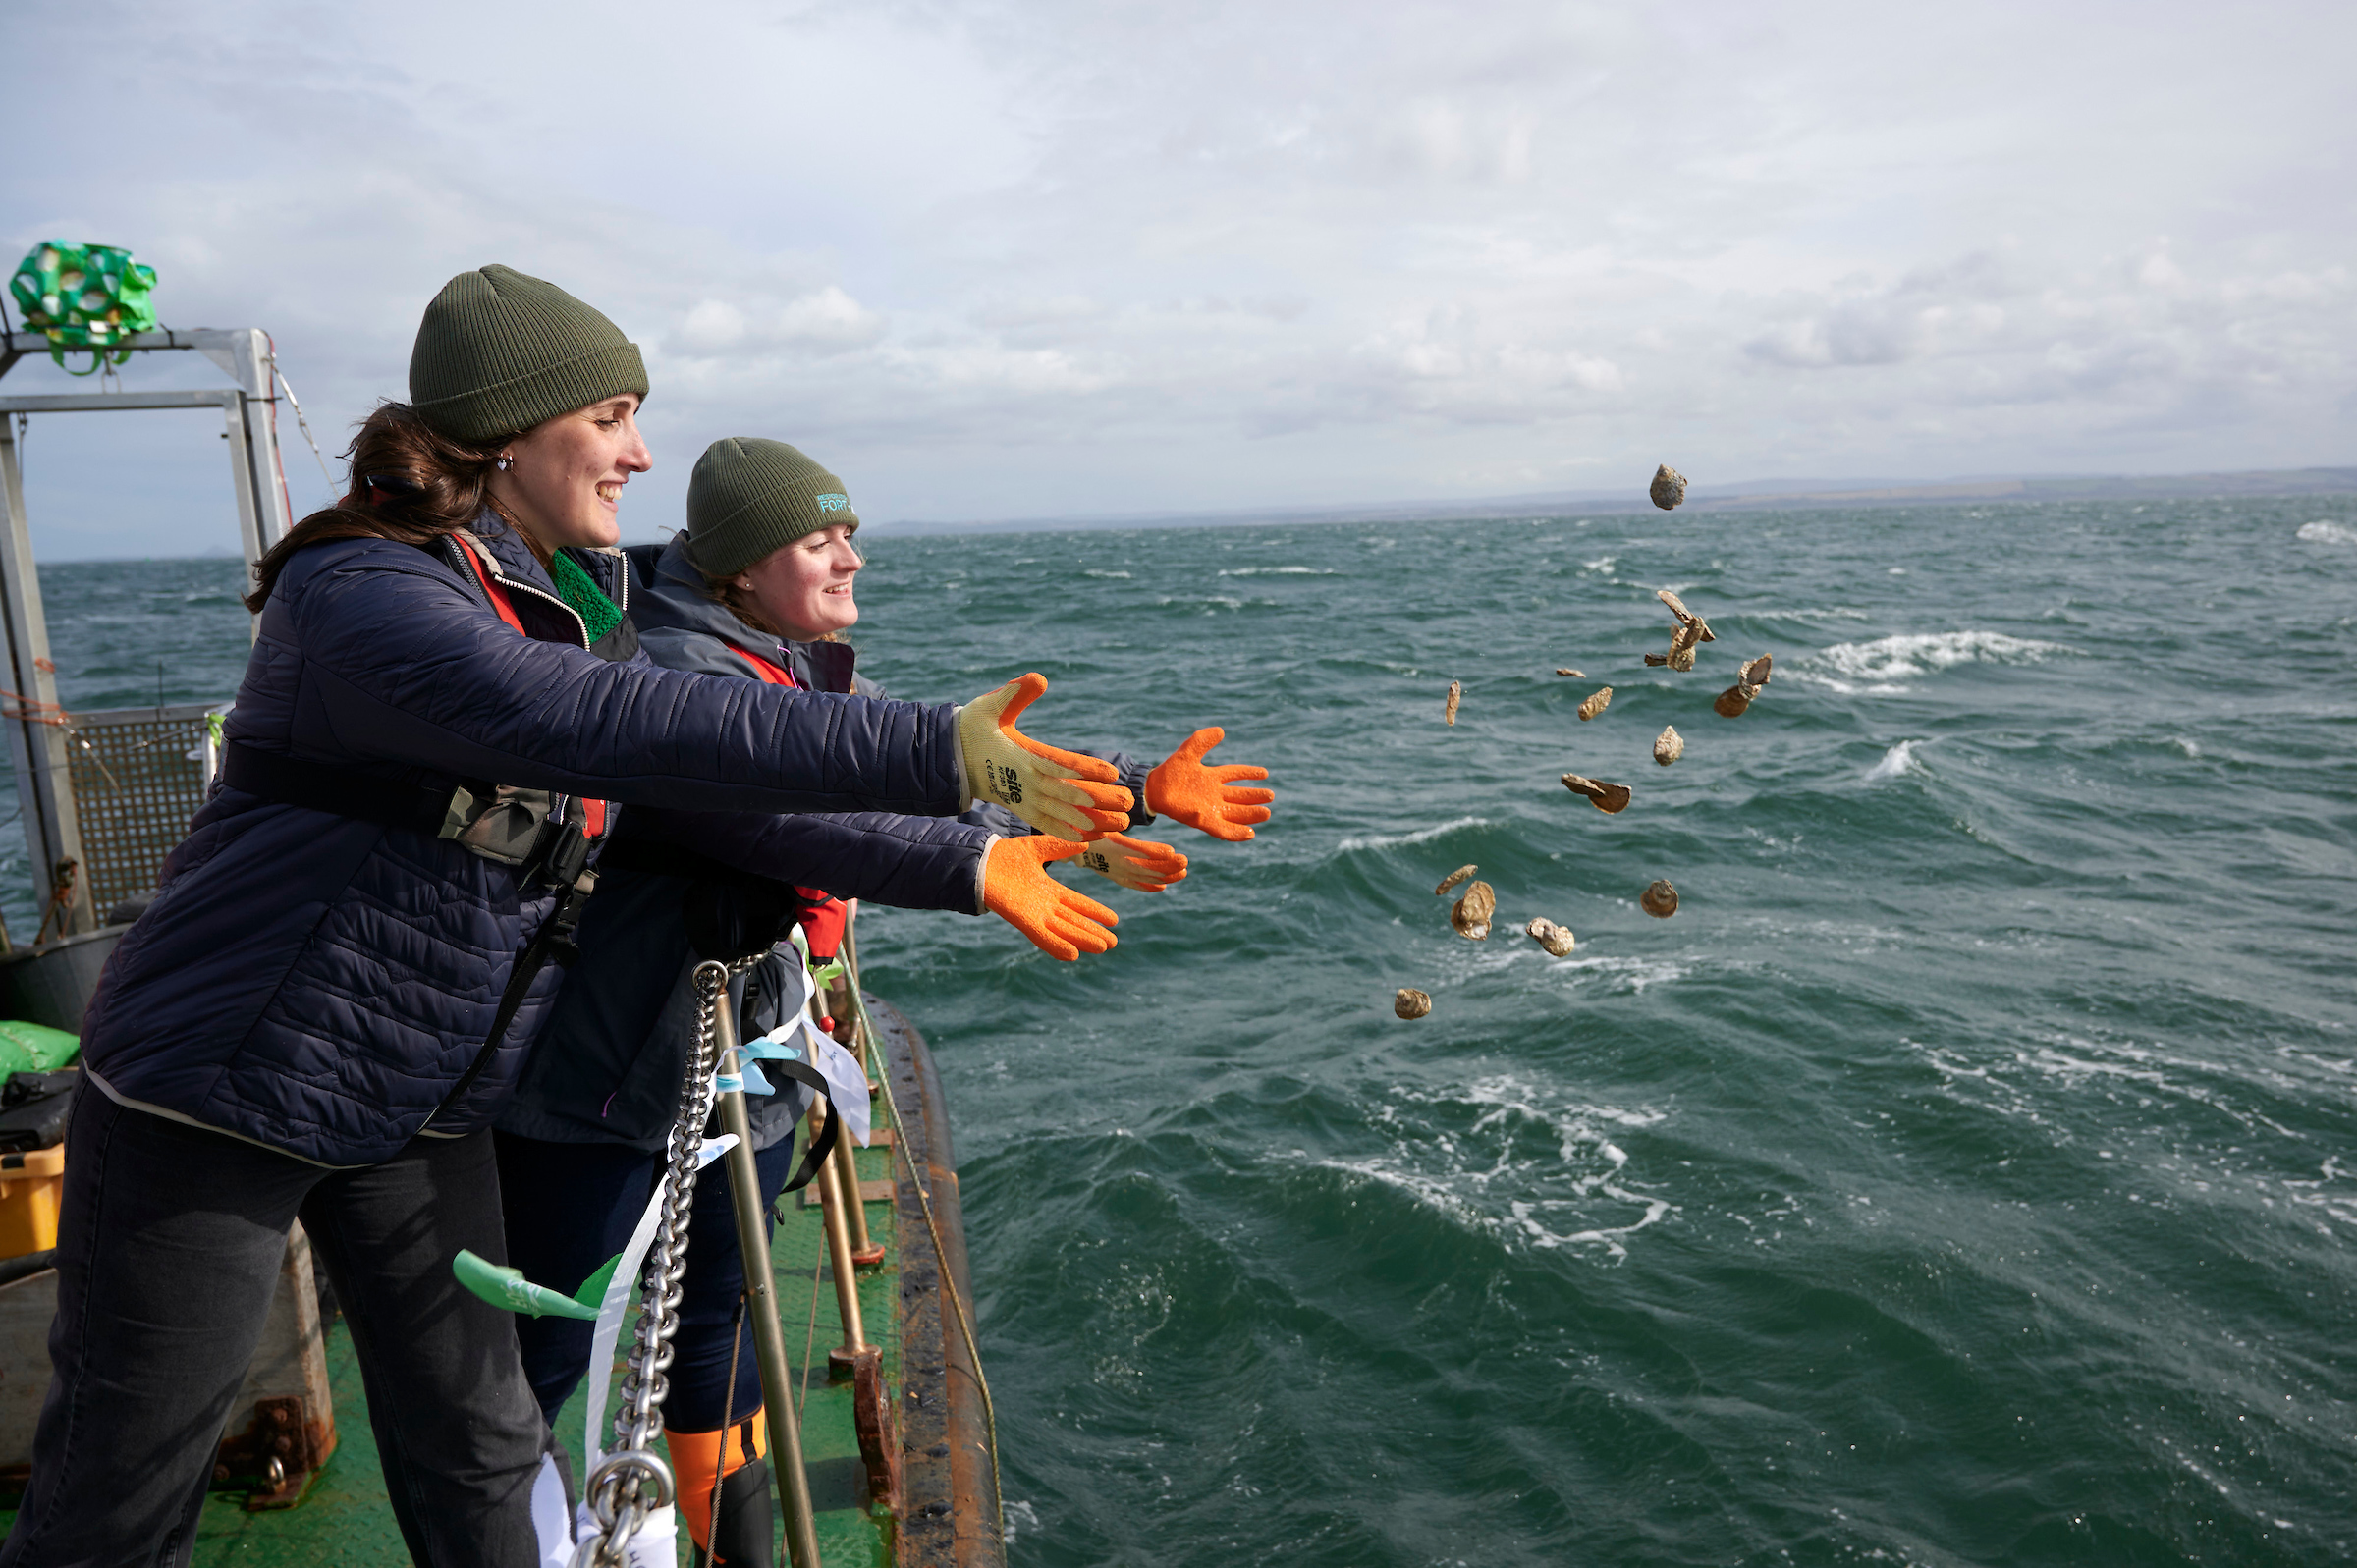 Native Oysters return to the Firth of Forth after 100 year absence.